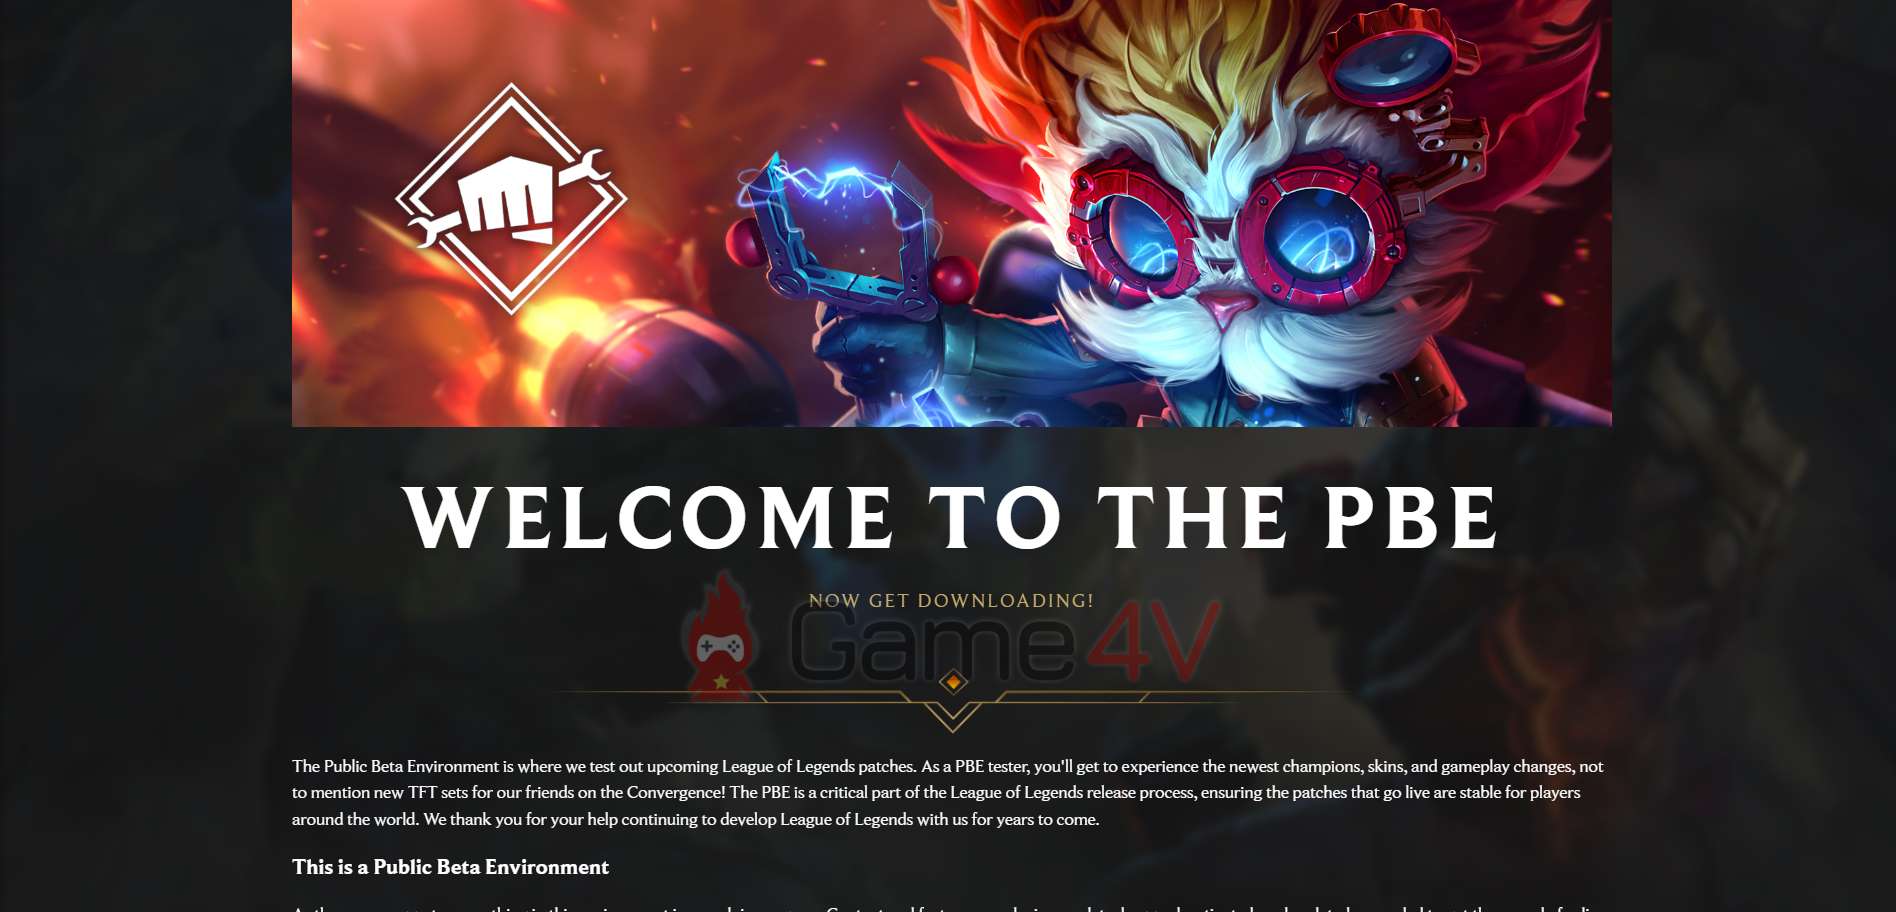 Riot Games introduces the latest content that will be updated on the PBE, typically the new season of Teamfight Tactics.